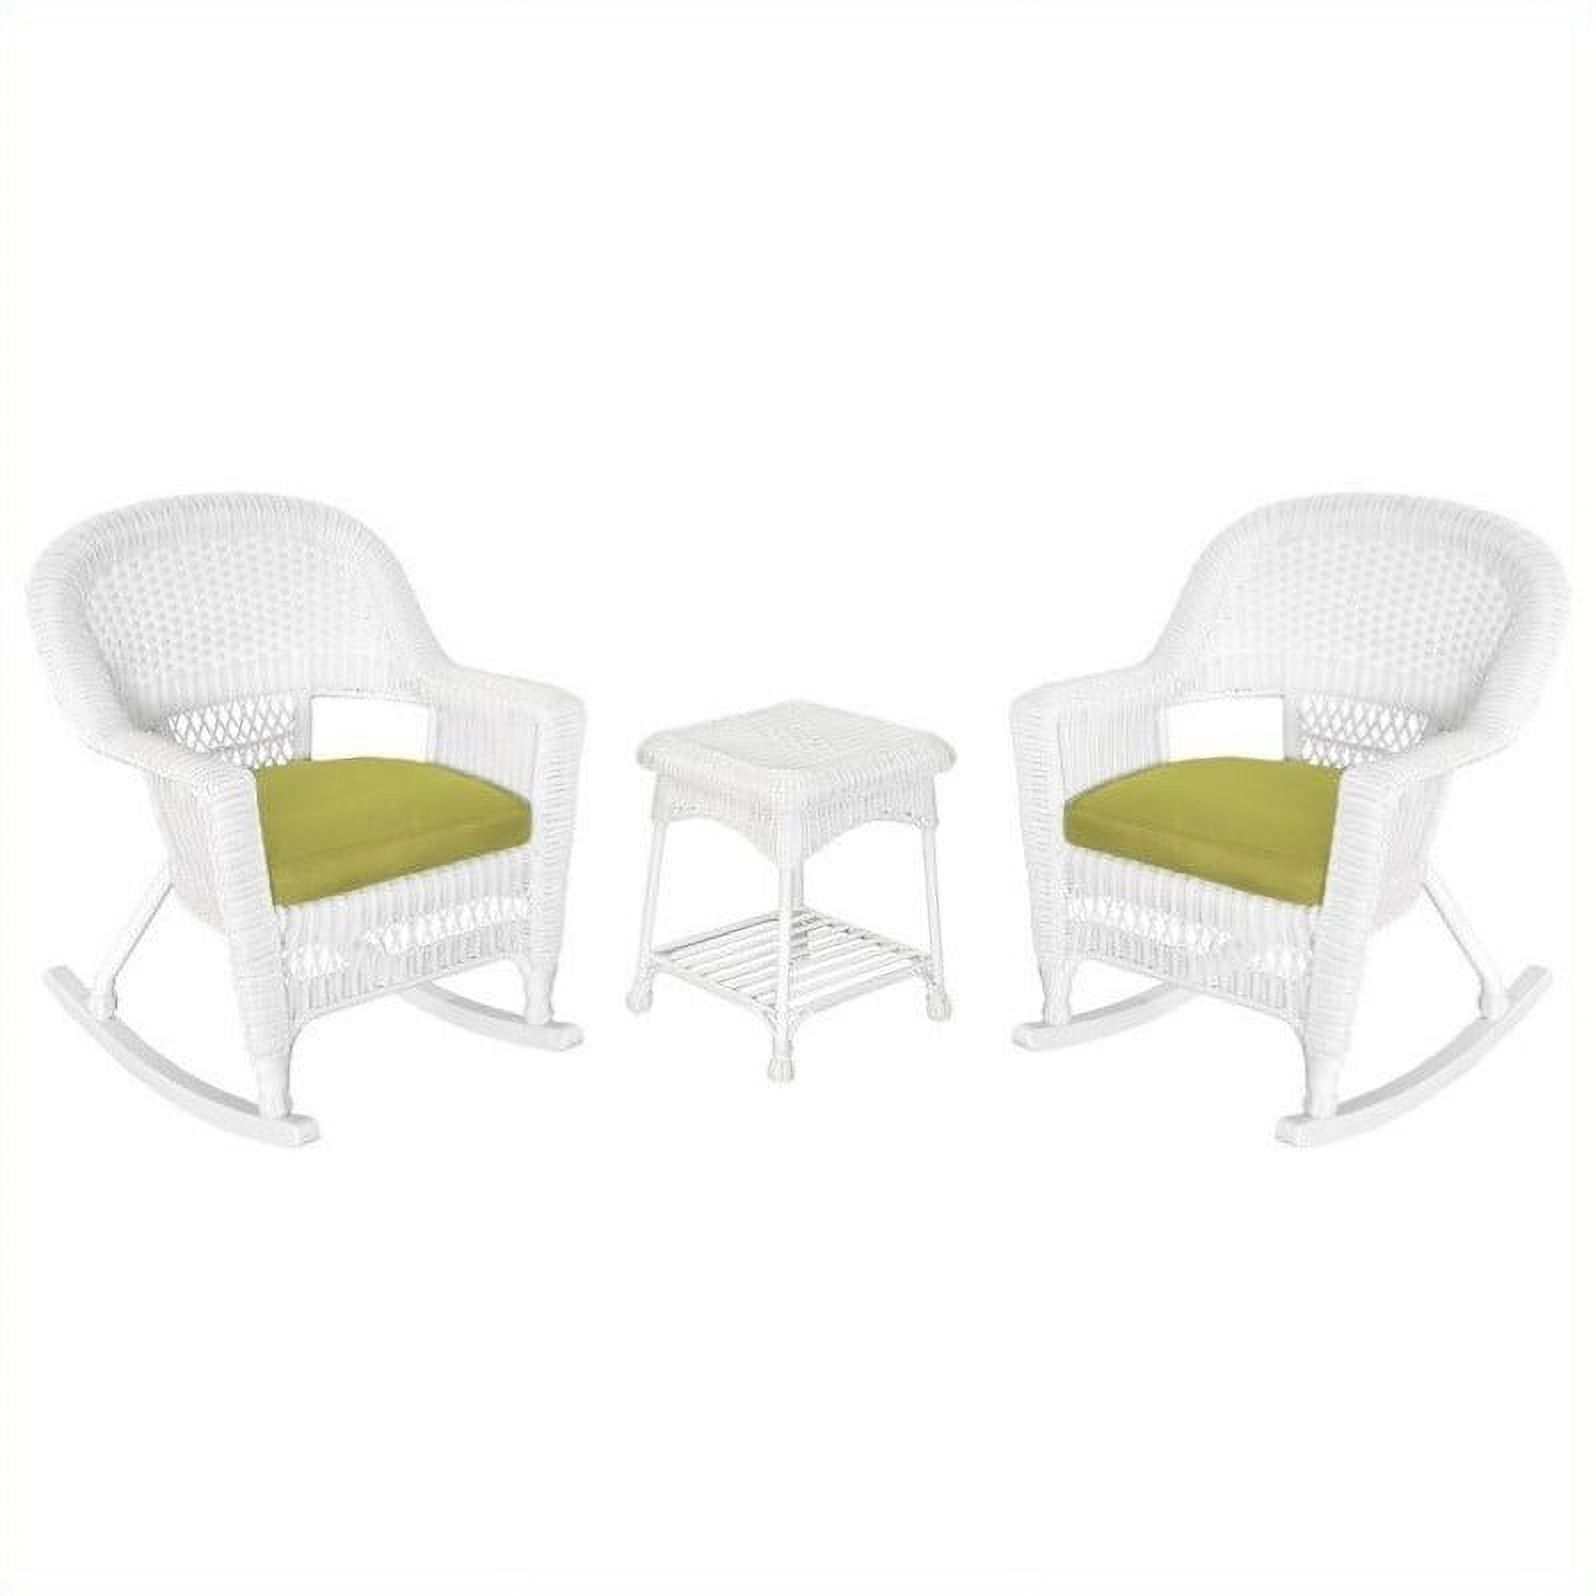 Afuera Living 3pc Rocker Wicker Chair Set in White with Green Cushion - image 1 of 1